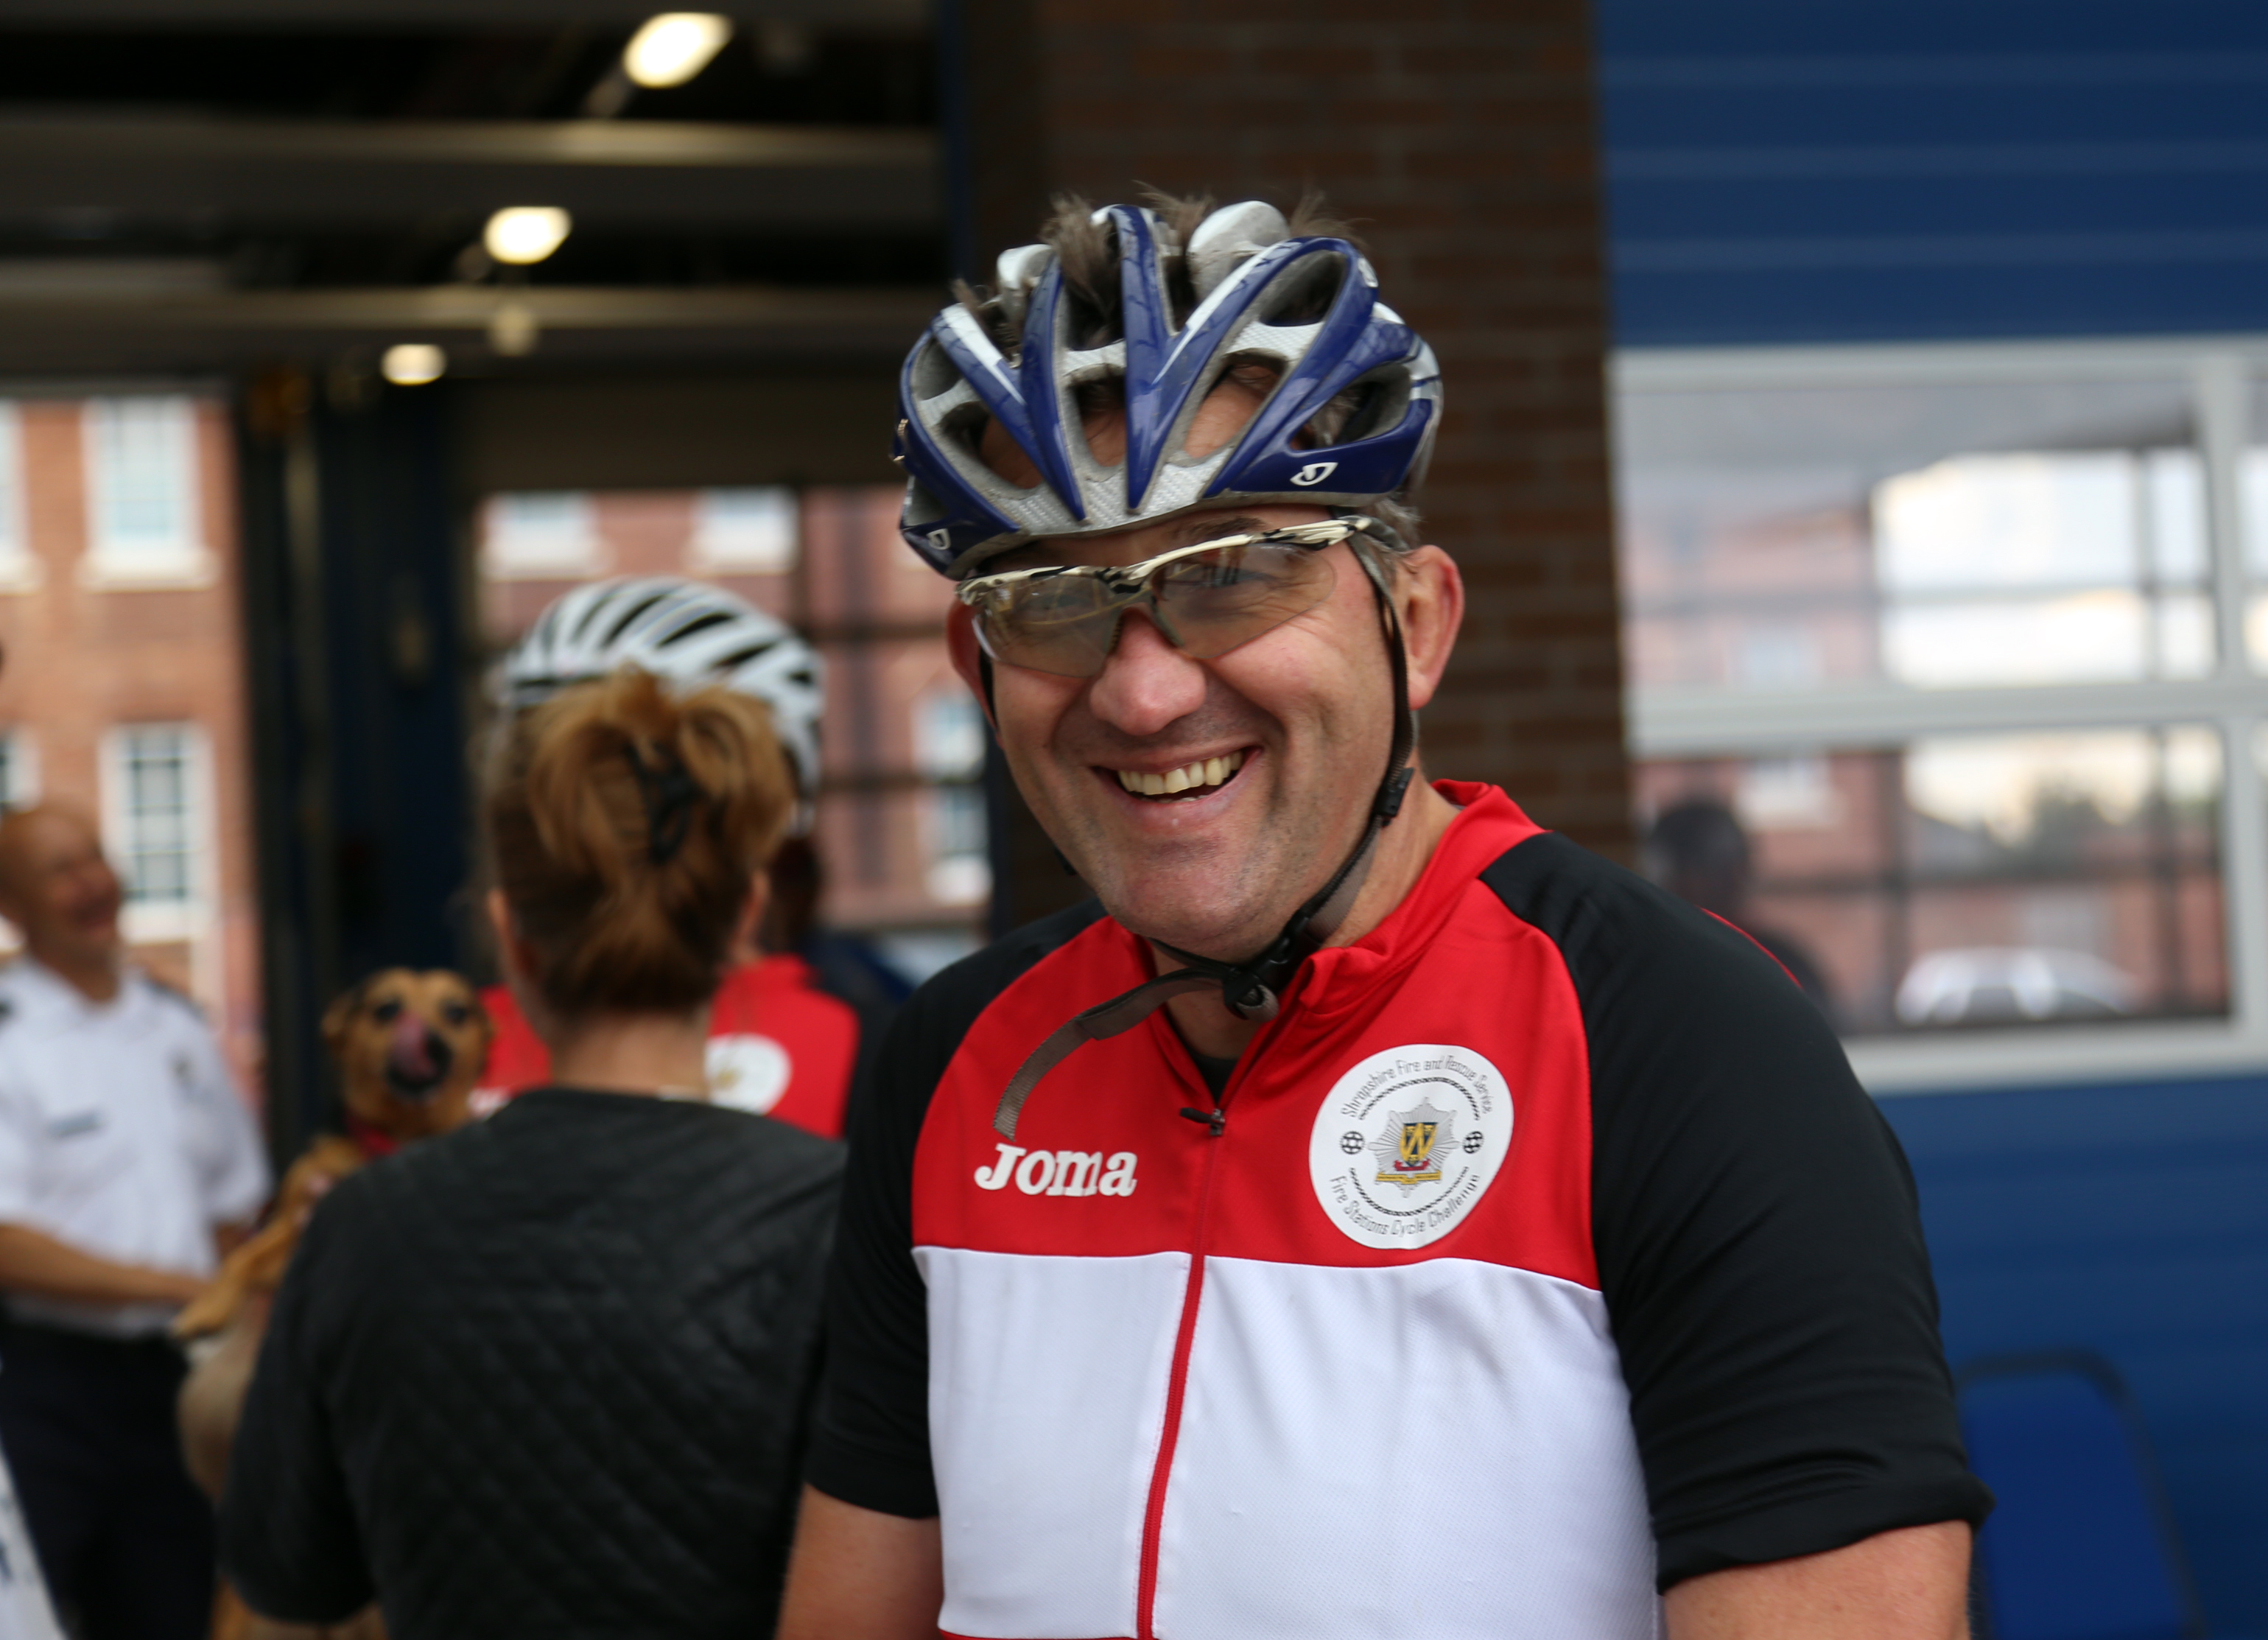 A "memorable" cycle ride to all Shropshire fire stations and "proud" to do it for two important charities, said Chief Fire Officer Rod Hammerton.